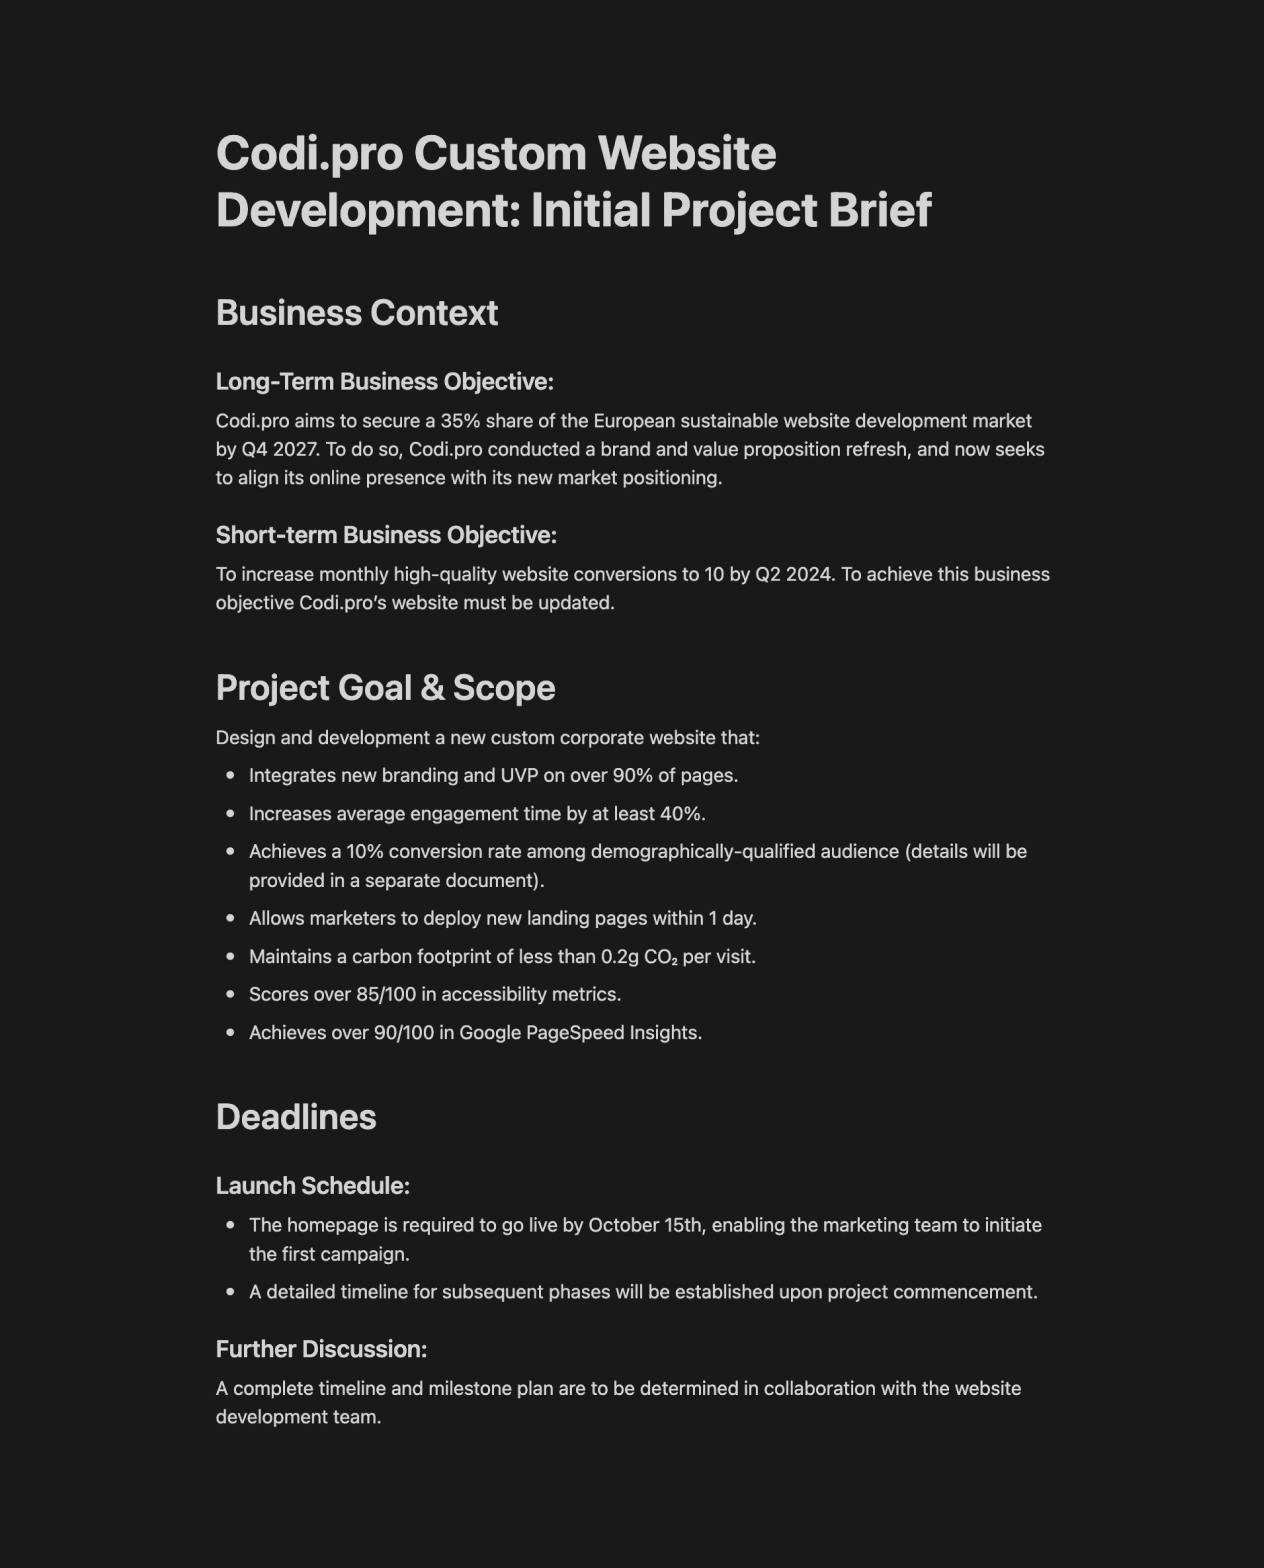 Brief of the project